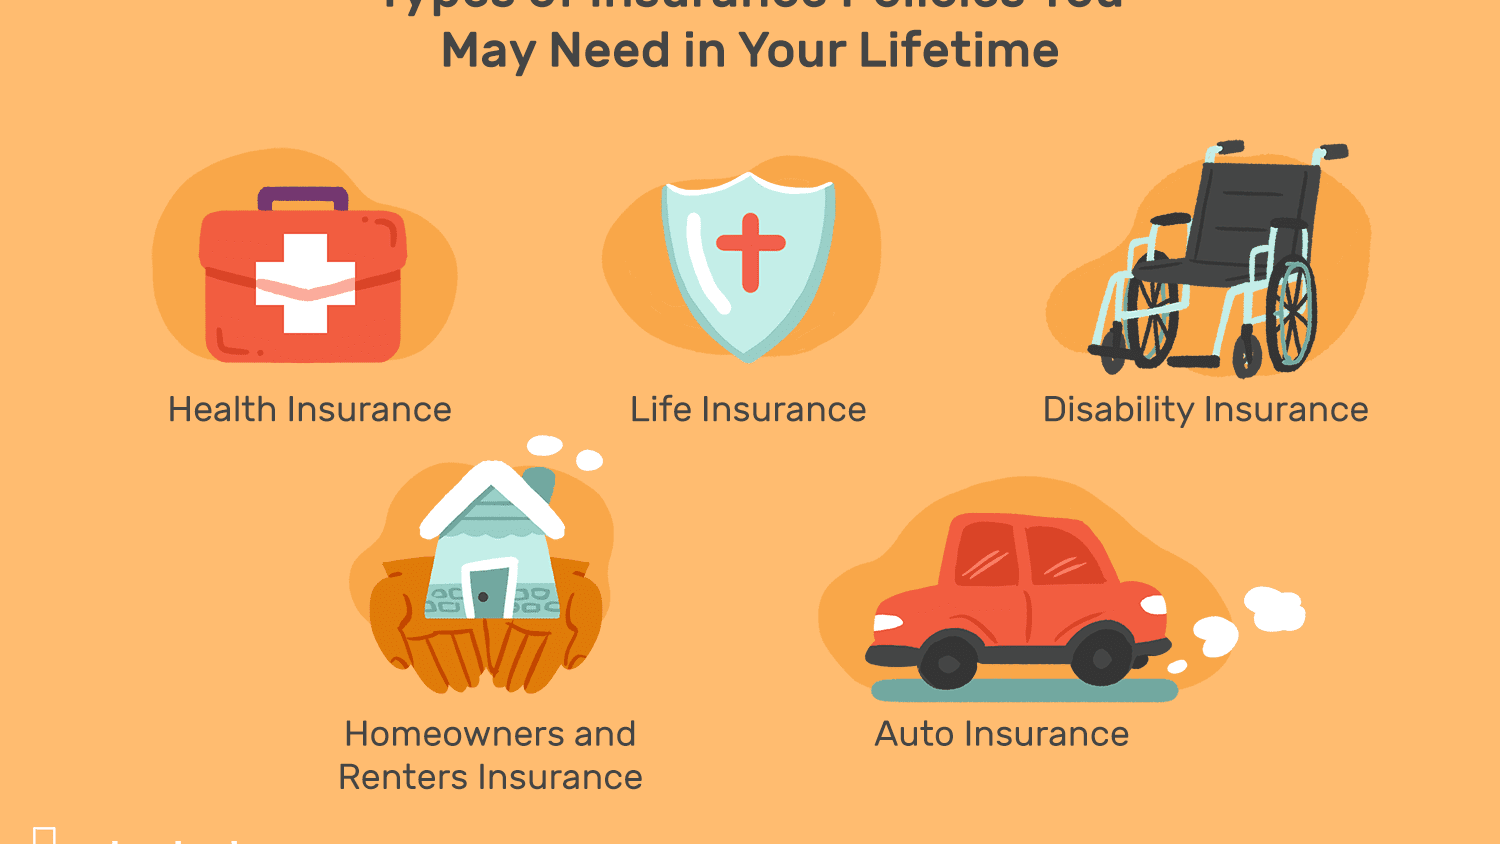 3. Getting insurance may encourage you to take better care of your health